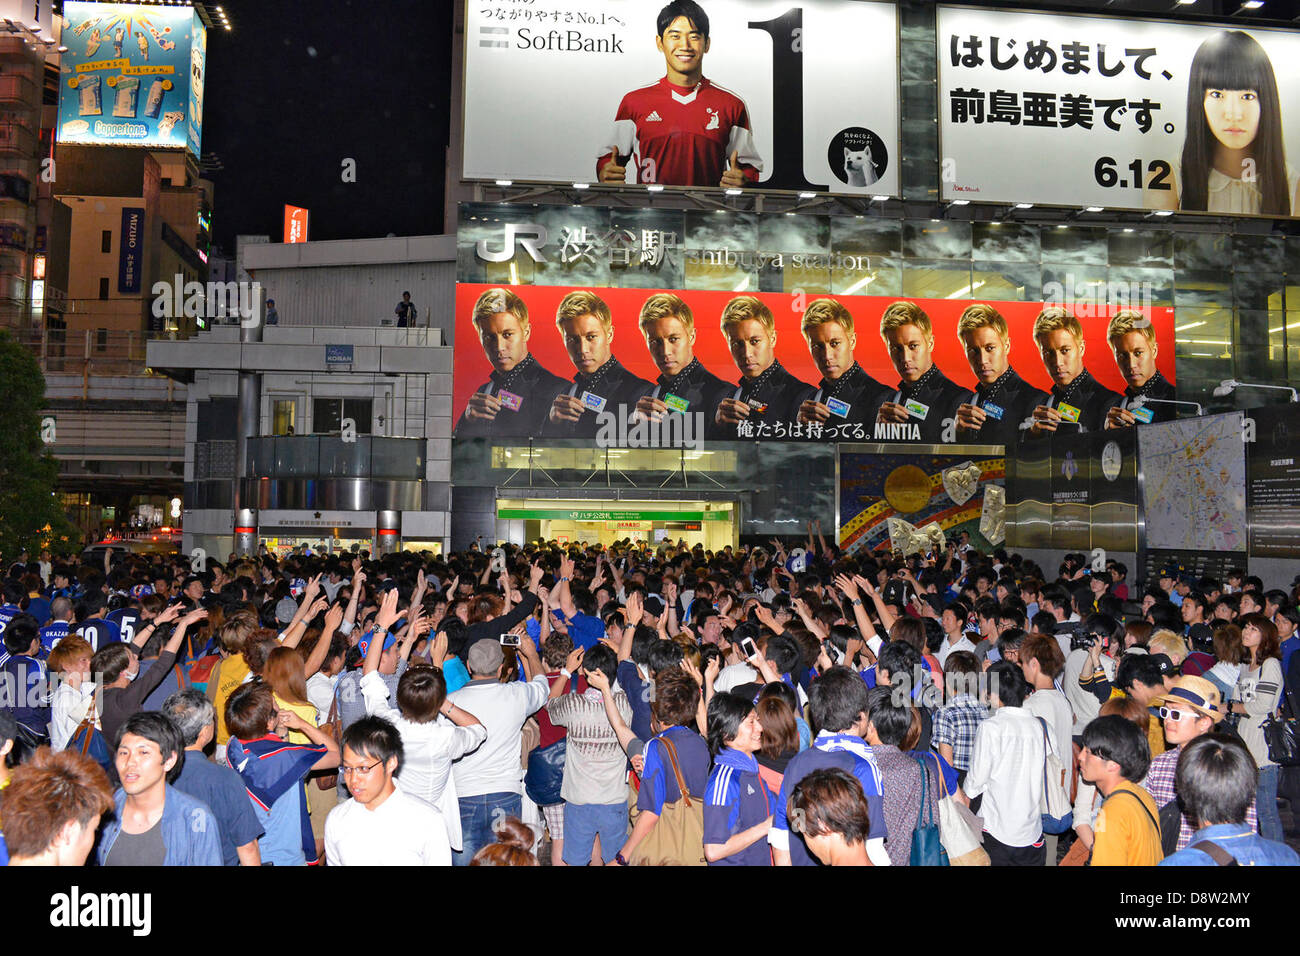 Saitama, Japan. 4th June 2013. June 4th, 2013 : Tokyo, Japan - Fans celebrated the Japan National Soccer team, which had a game of the final Asian qualifiers for the 2014 World Cup against Australia and cleared it, in front of Shibuya Station, Shibuya, Tokyo Japan on June 4, 2013.  (Photo by Koichiro Suzuki/AFLO/Alamy Live News) Stock Photo